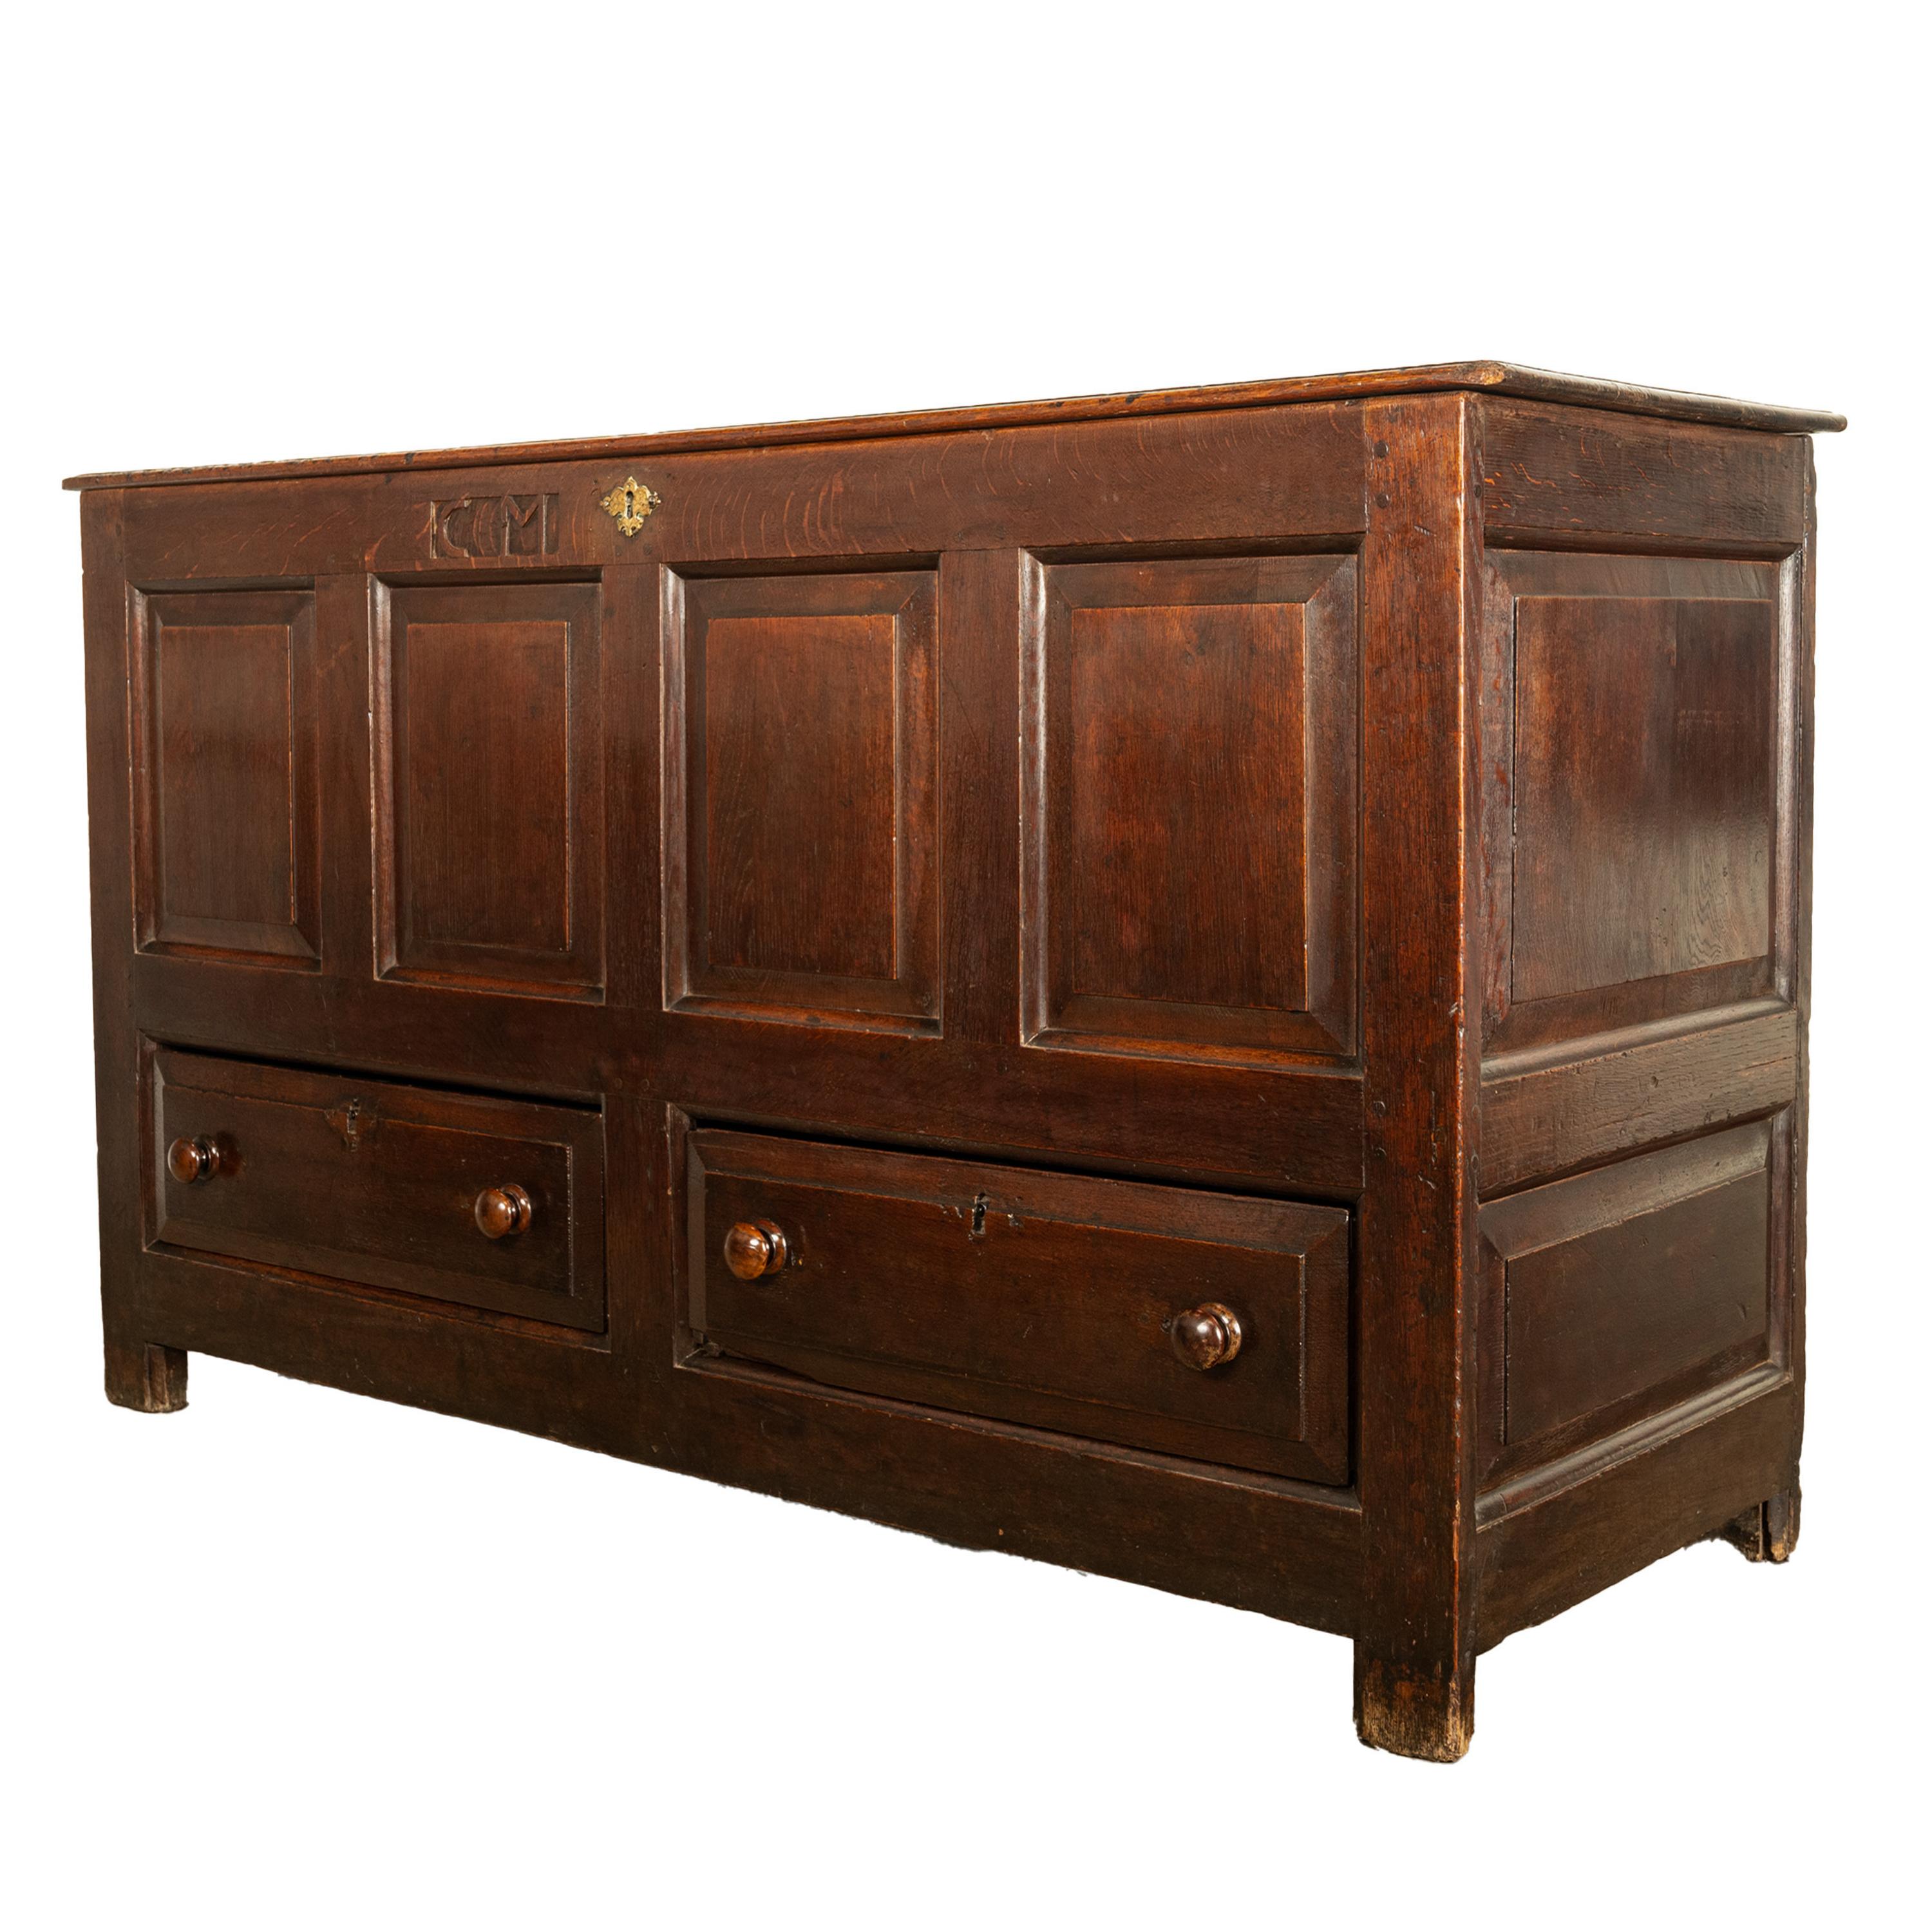 Joinery Monumental Antique Georgian Joined Oak Mule Dowry Chest Coffer Yorkshire 1720 For Sale